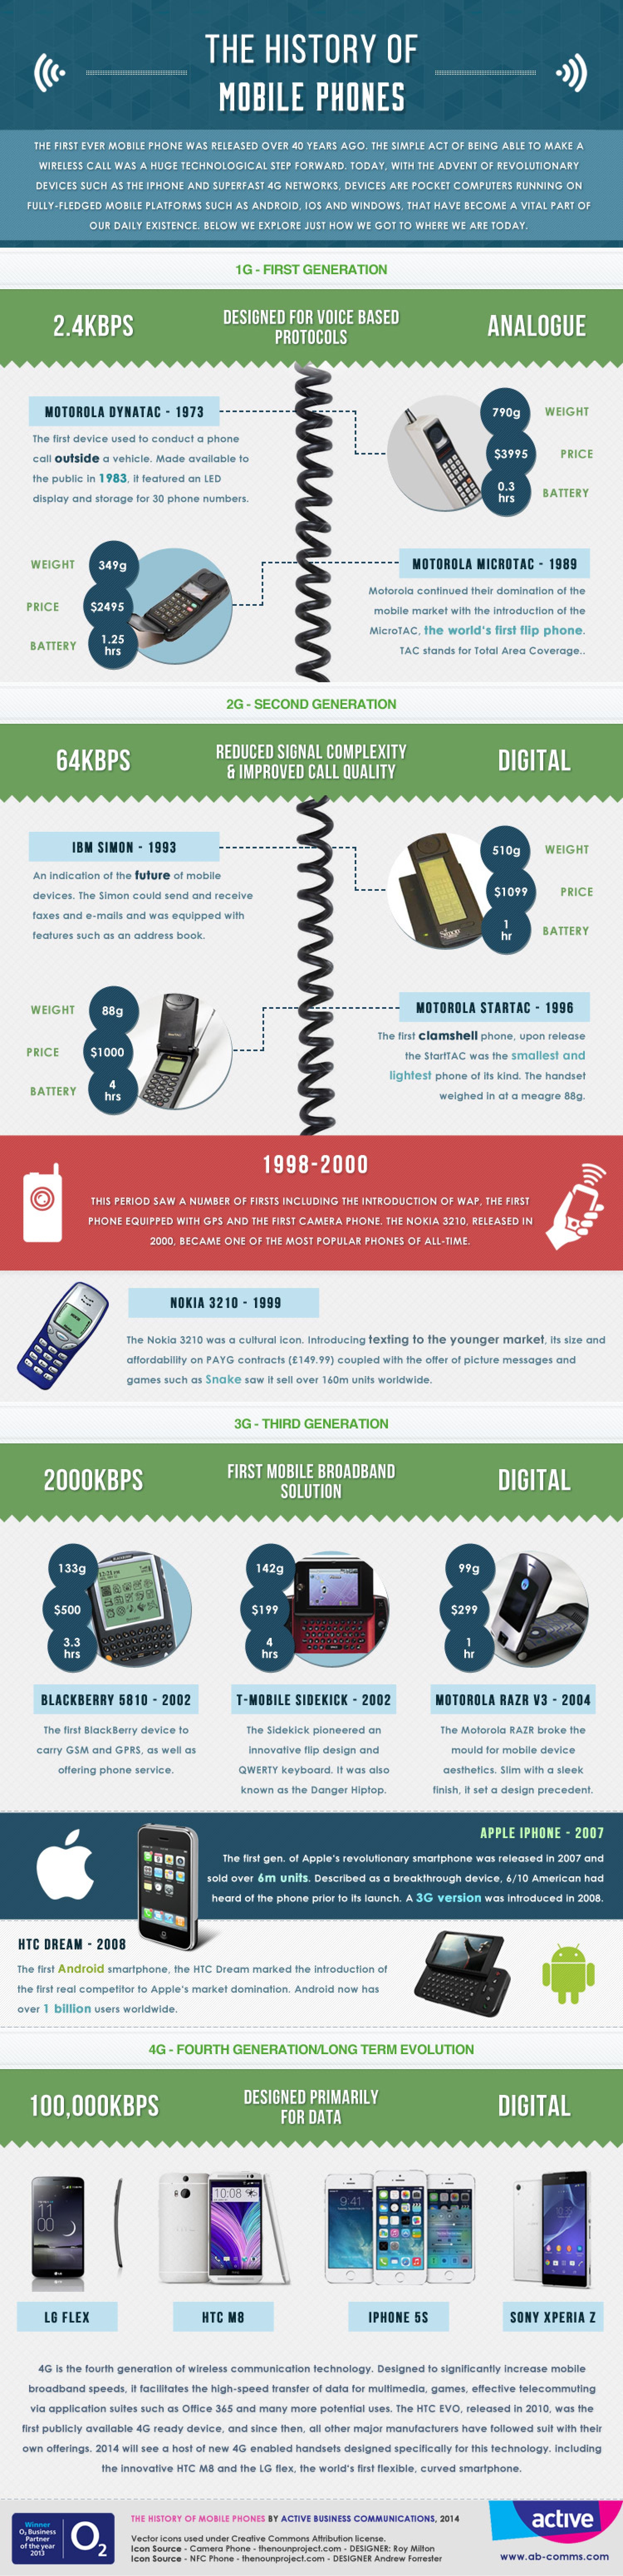 The history of mobile phones